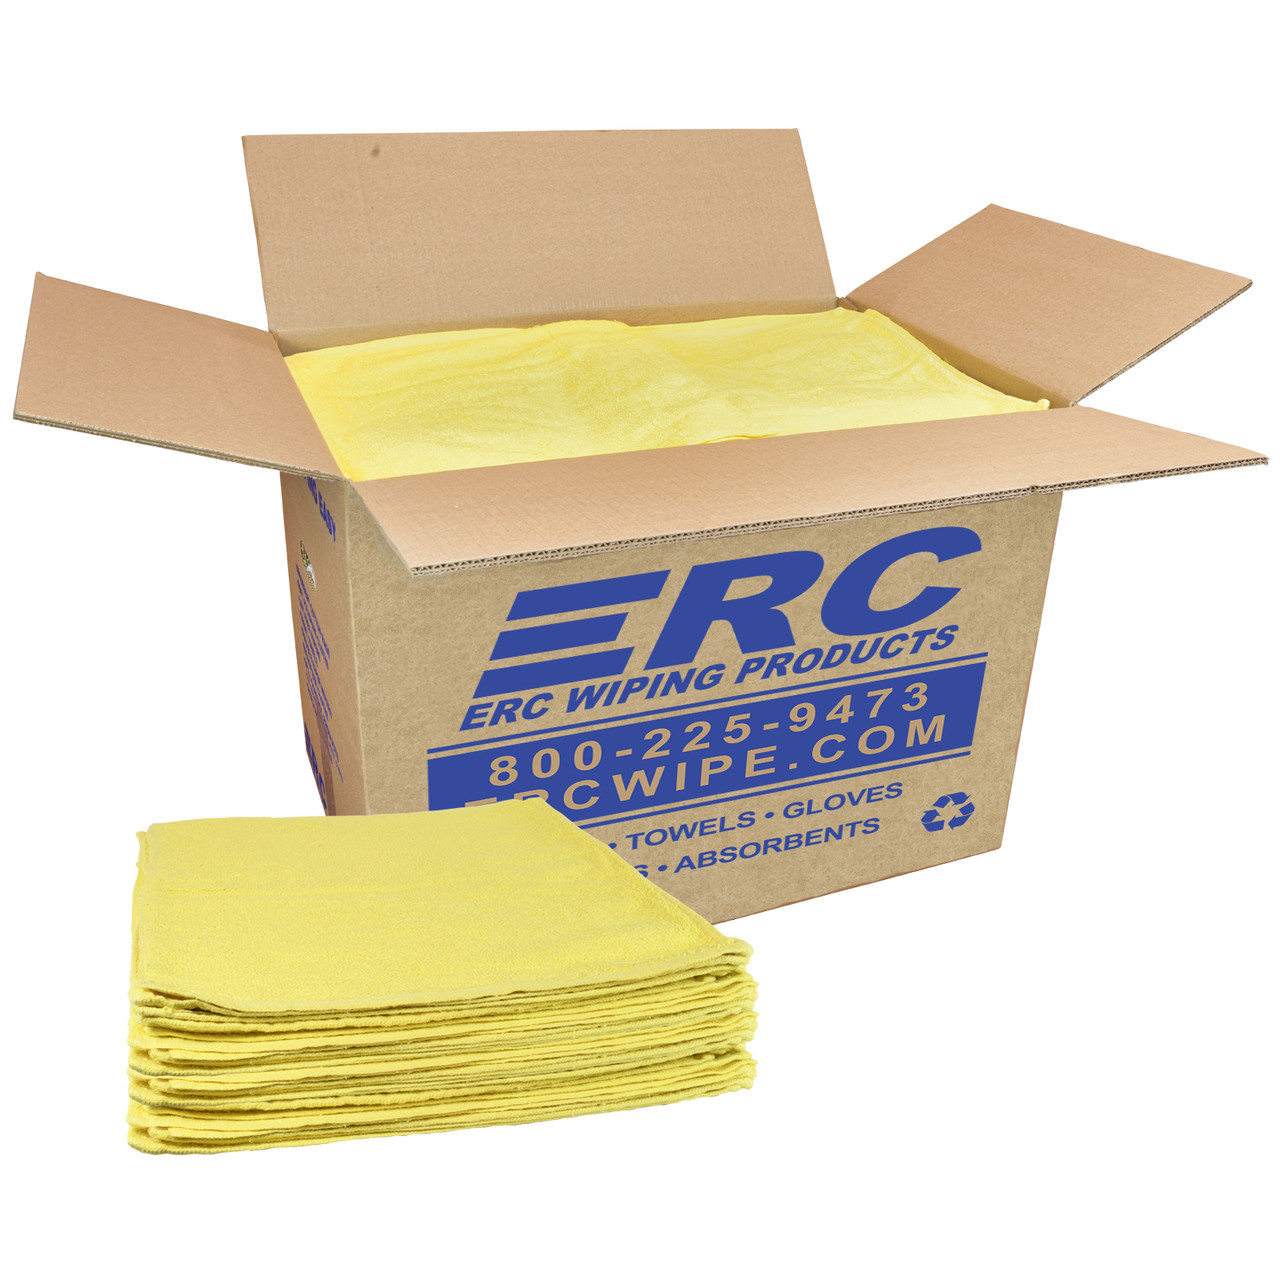 White Terry Towel 100% Cotton Cleaning Rags - 50 lbs. Box